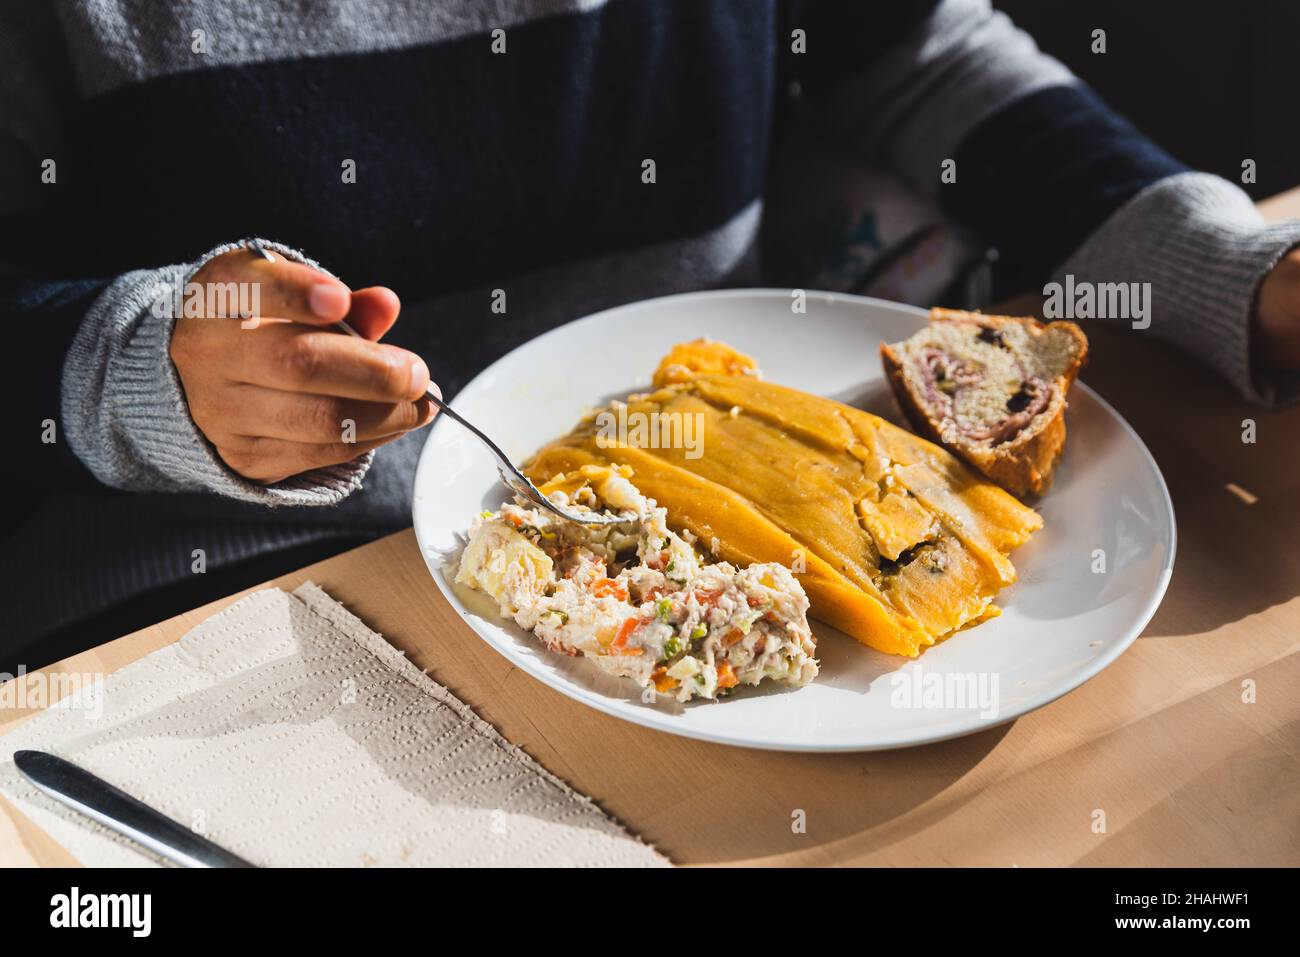 woman eating traditional venezuelan christmas dish with hallacas, pan de jamon or ham bread, and mixed salad, with cutlery and ready. traditional dish Stock Photo